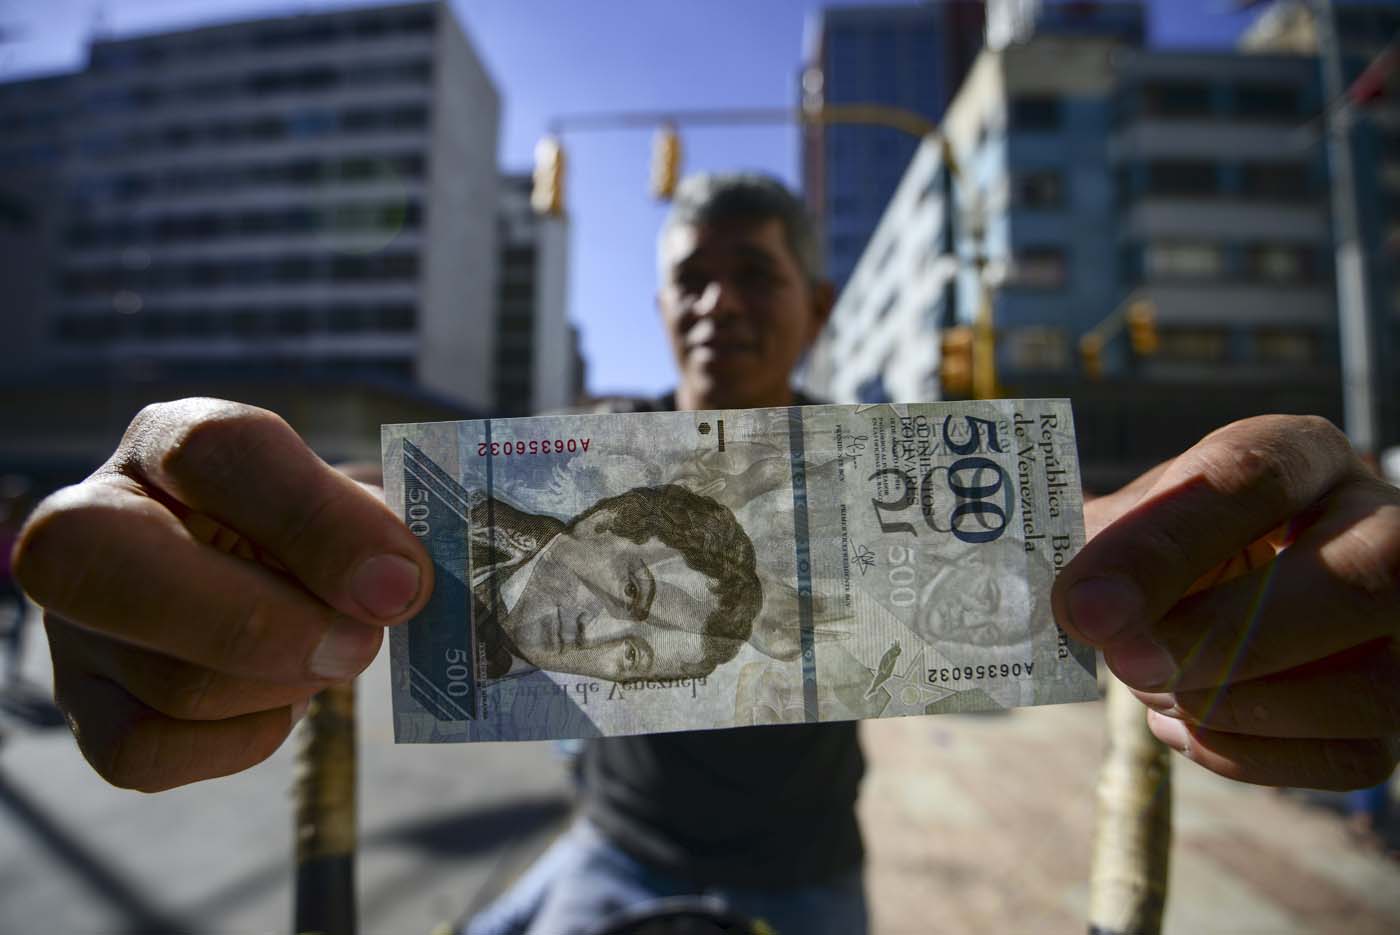 A street coffee vendor shows a new 500-Bolivar-note (74 cents of US dollar) in Caracas on January 16, 2017. A new family of currency will progressively come into circulation in the South American country that has the highest inflation rate in the world, which IMF forecasts say could soon hit 475 percent. / AFP PHOTO / JUAN BARRETO